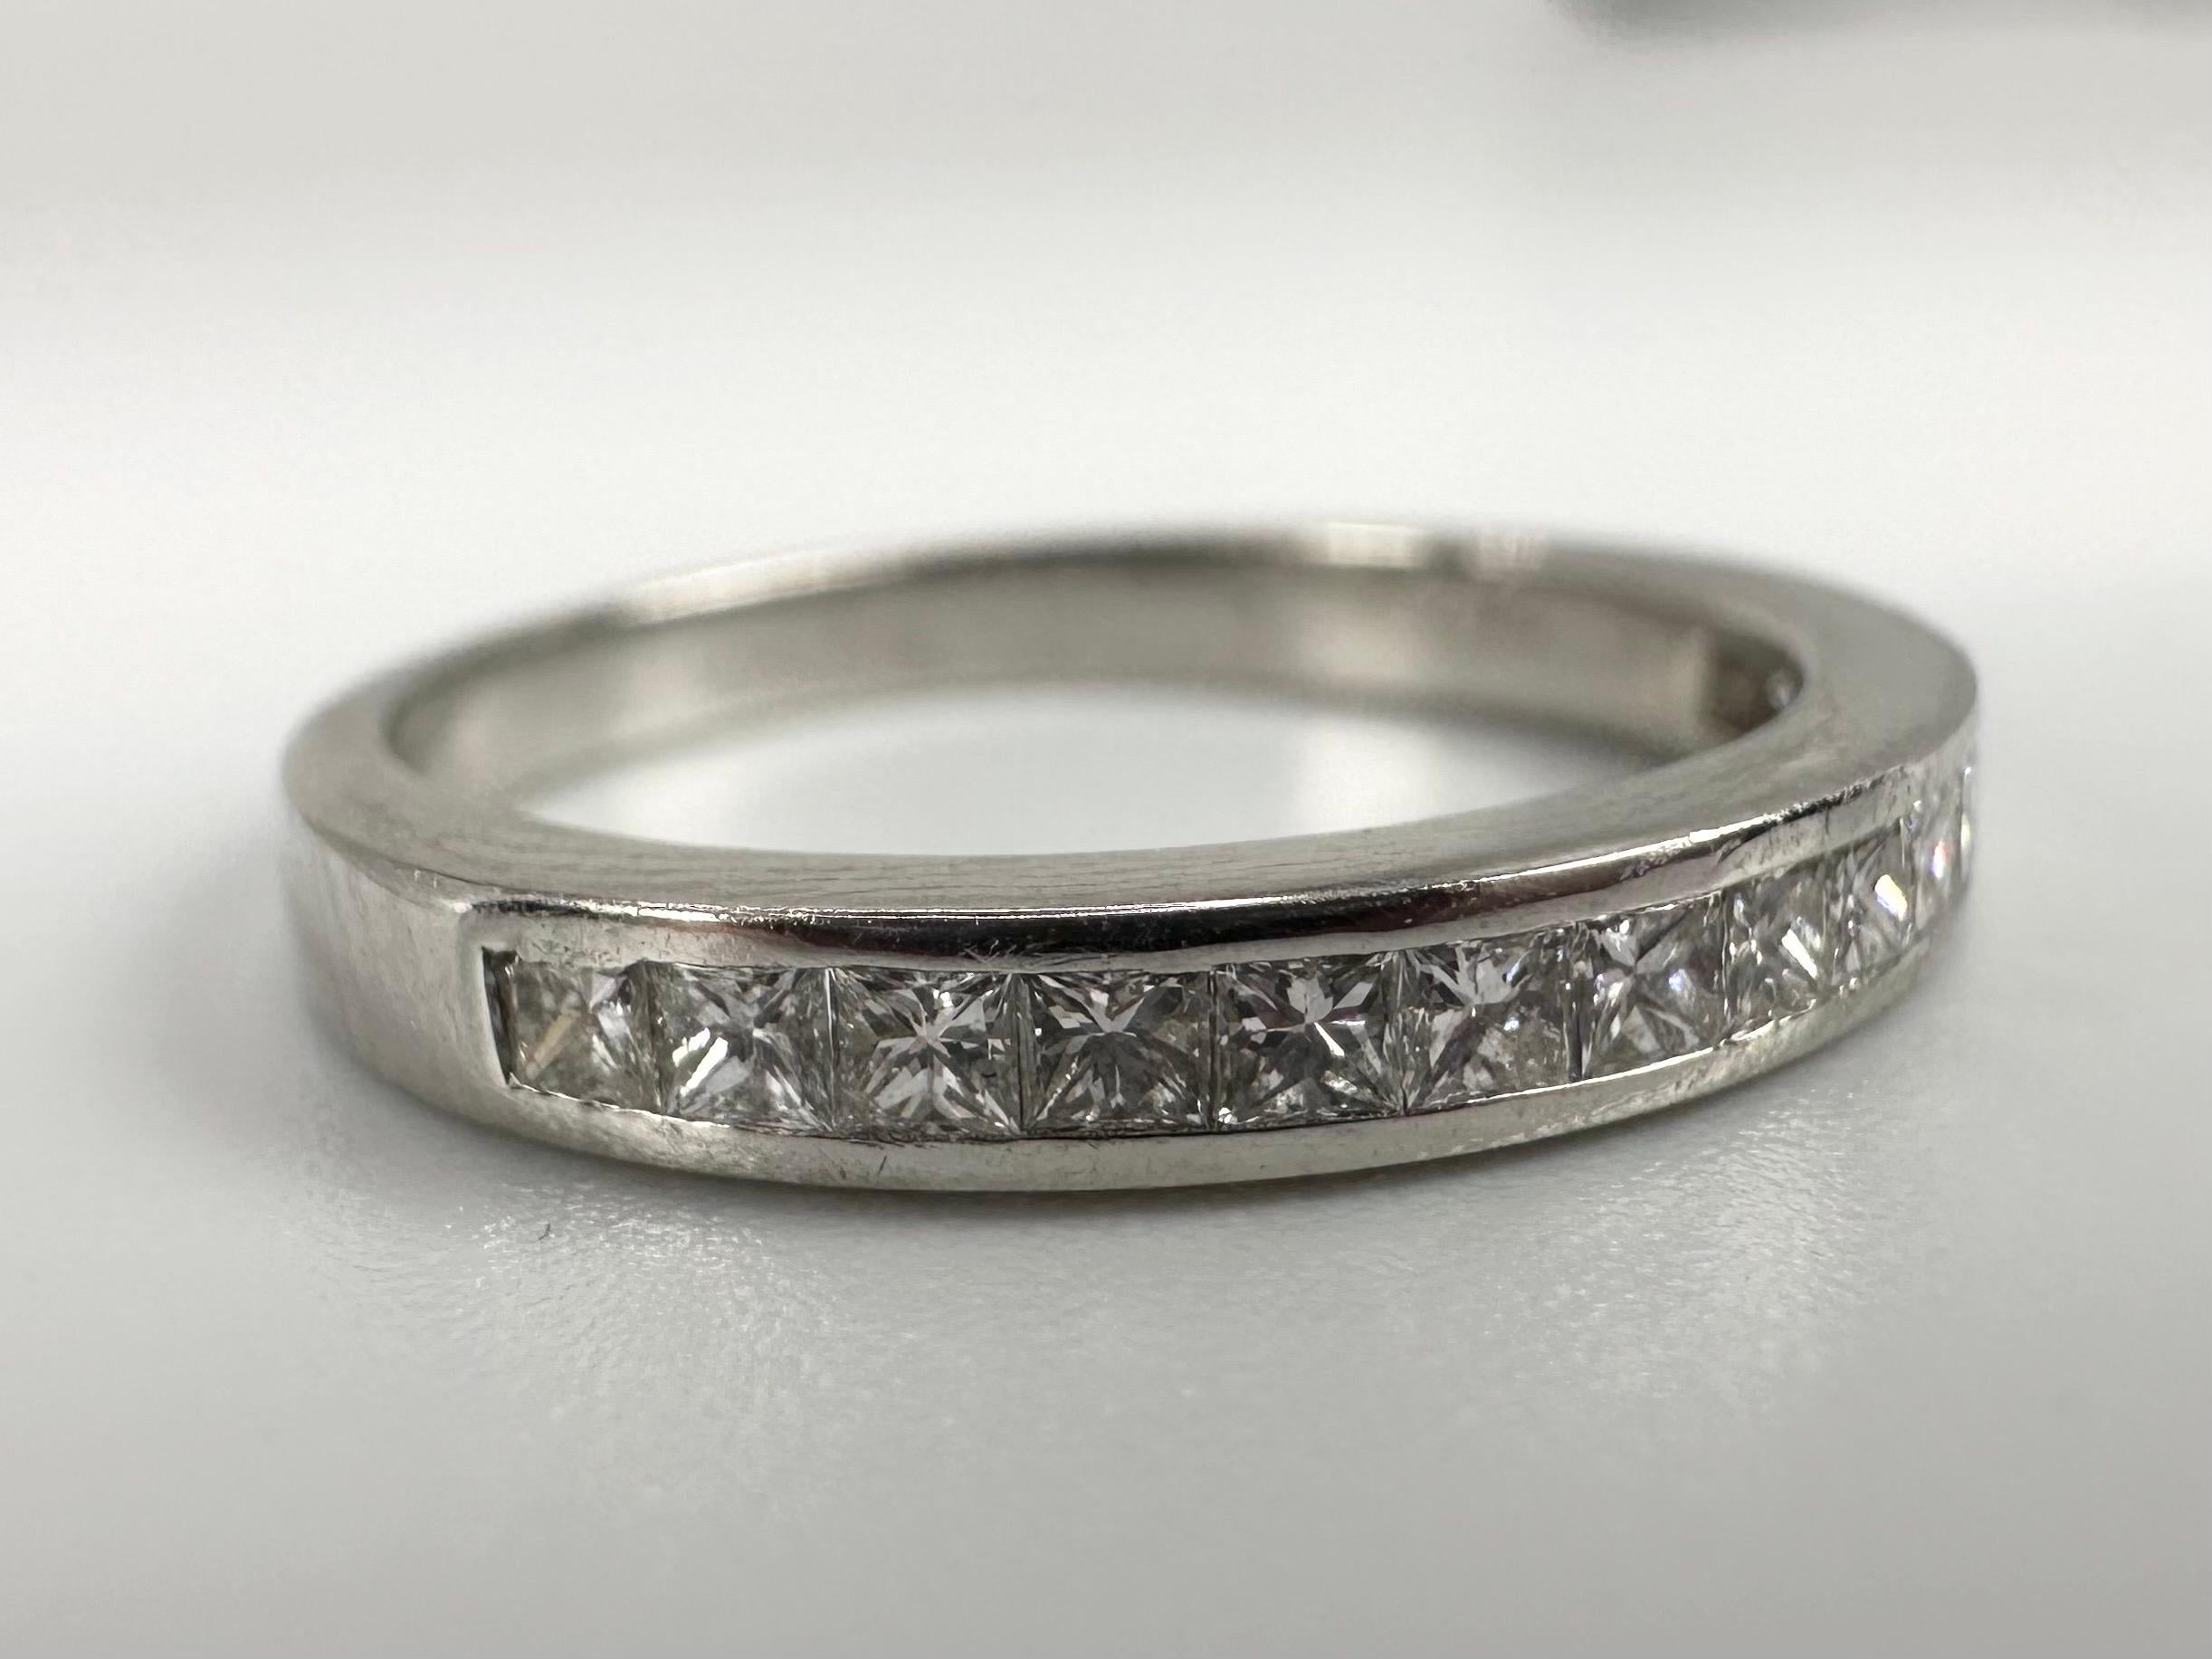 Stunning platinum diamond band with square diamonds in channel setting design.

metal: PLATINUM
NATURAL DIAMOND(S)
Clarity/Color: VS-SI/F-G
Carat:0.30ct
Cut:Square Brilliant (Princess)
Grams:3.42
size: 5
Item#: 110-00049PRA

WHAT YOU GET AT STAMPAR